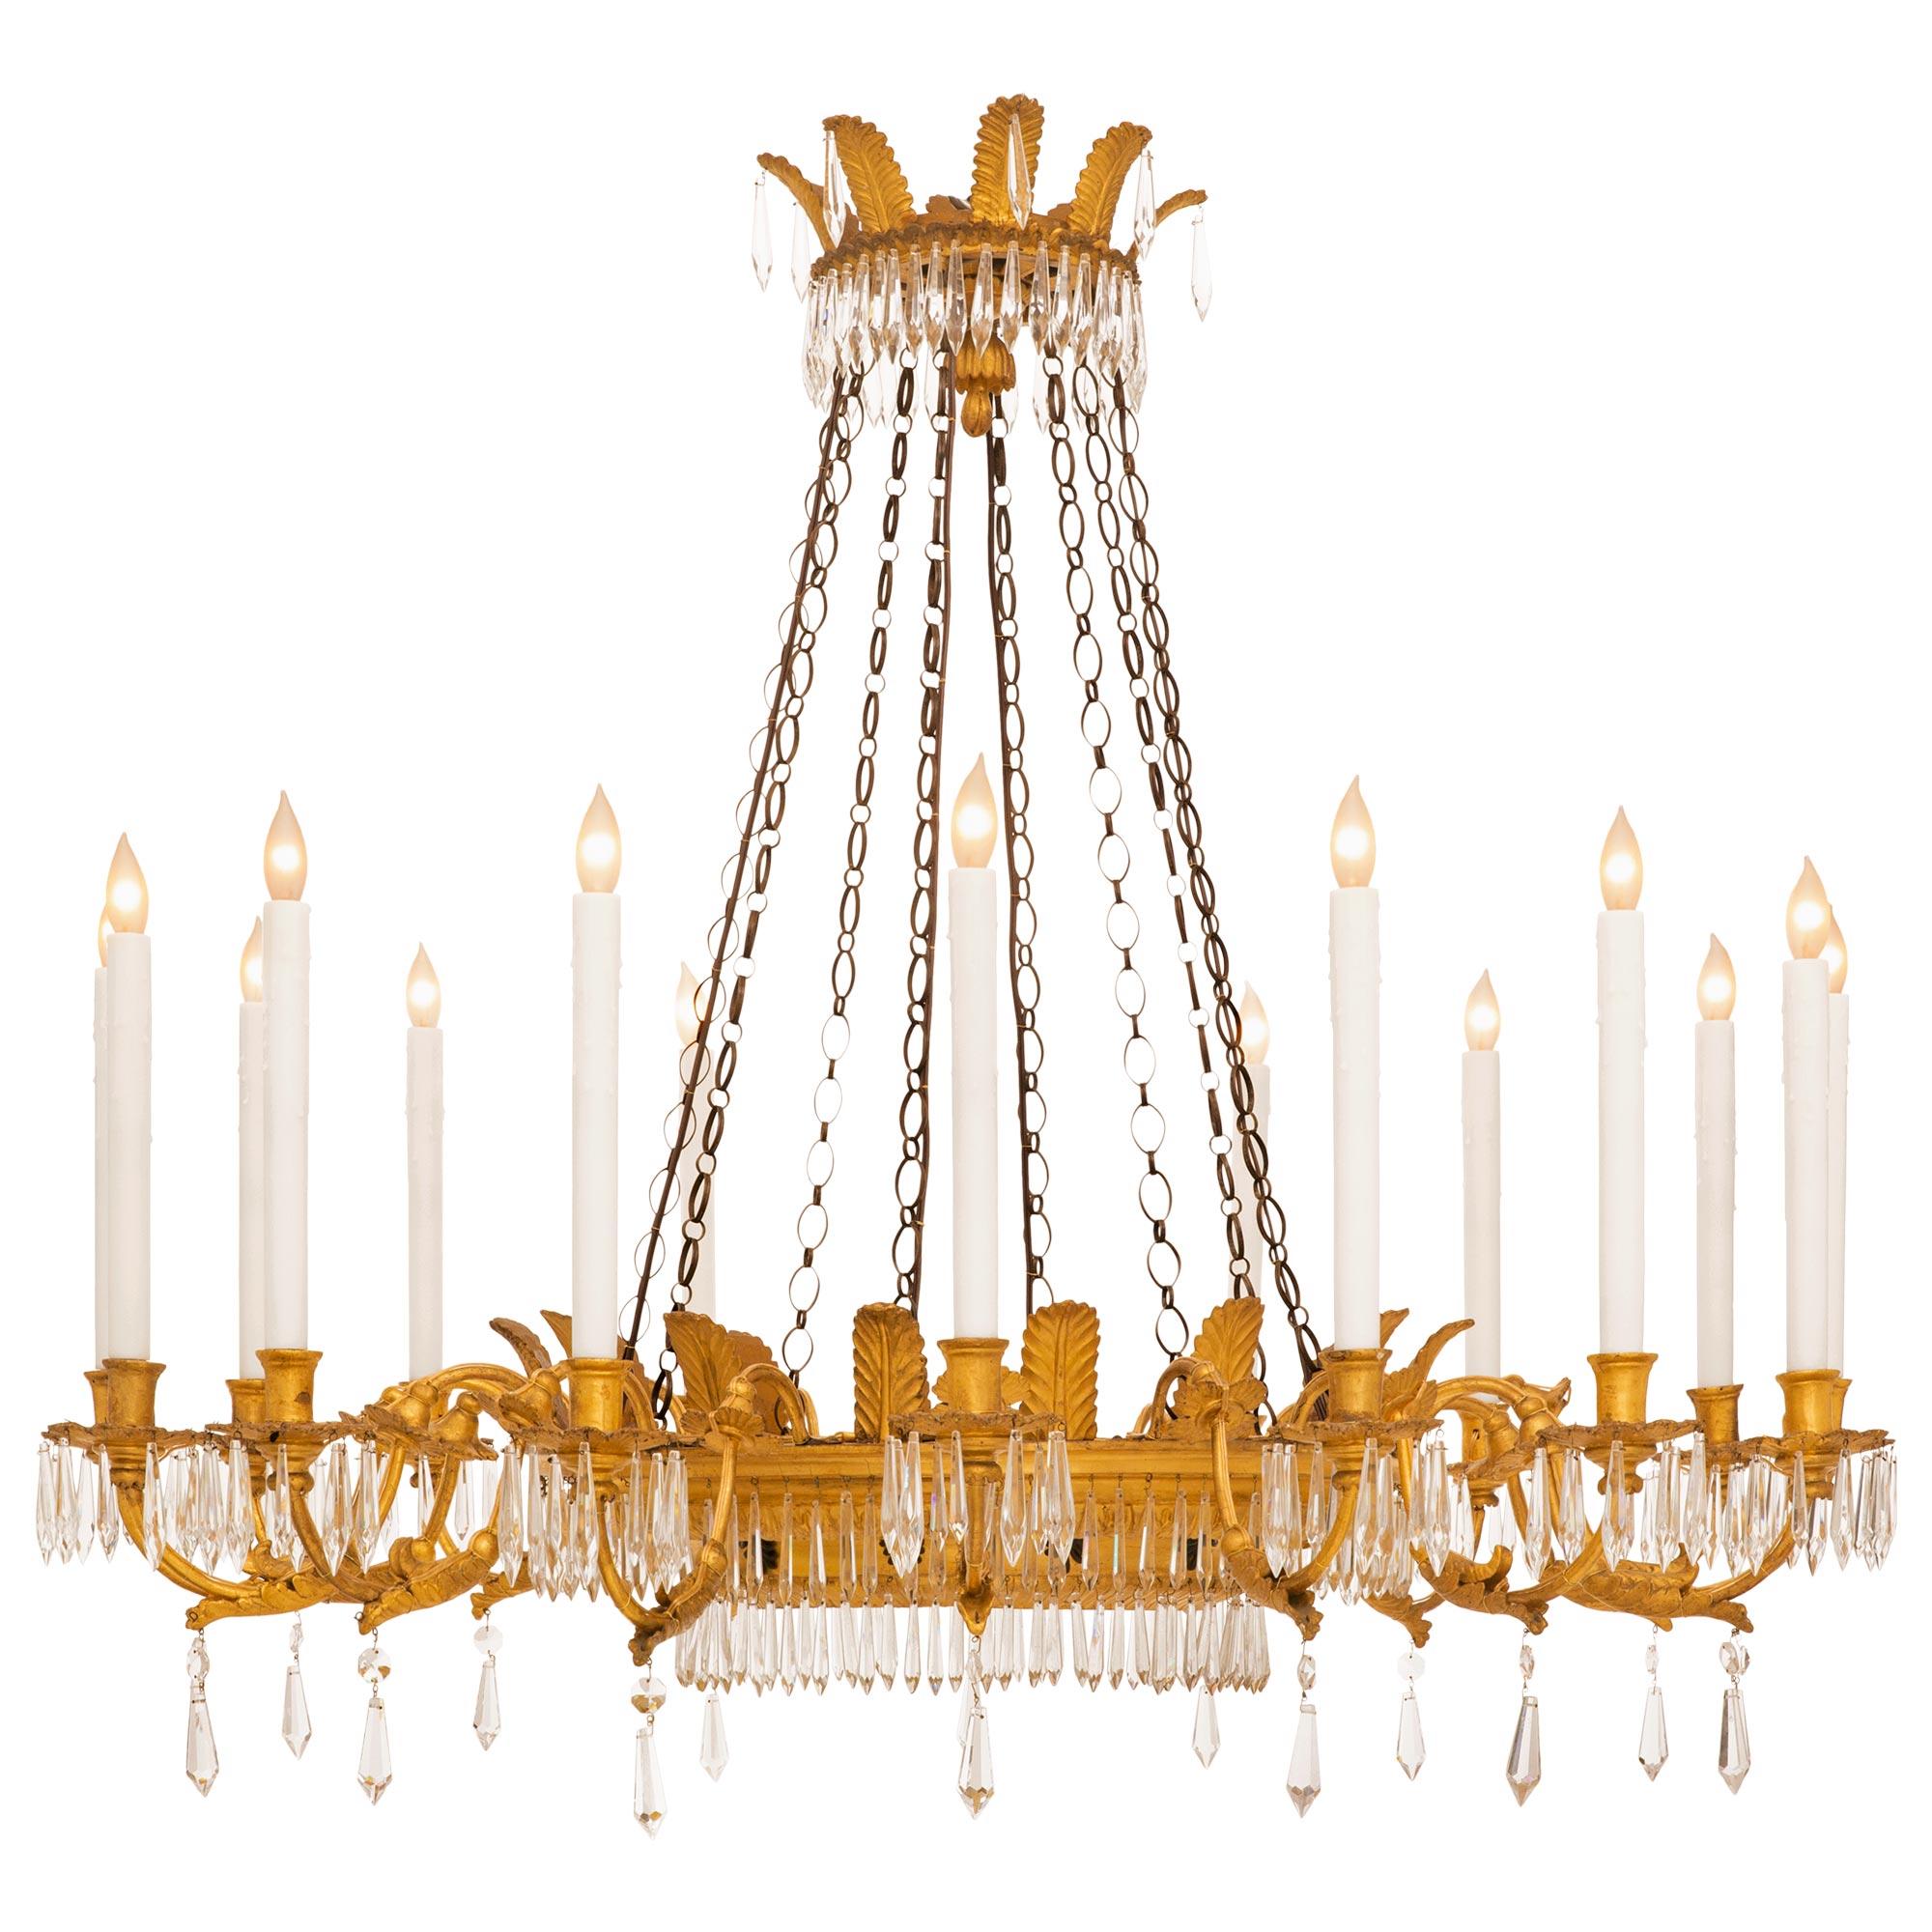 A beautiful and most elegant Italian 18th century Louis XVI period giltwood and crystal chandelier. The sixteen arm chandelier is centered by a stunning fitted cut crystal dome with exquisite wonderfully executed floral designs with a most